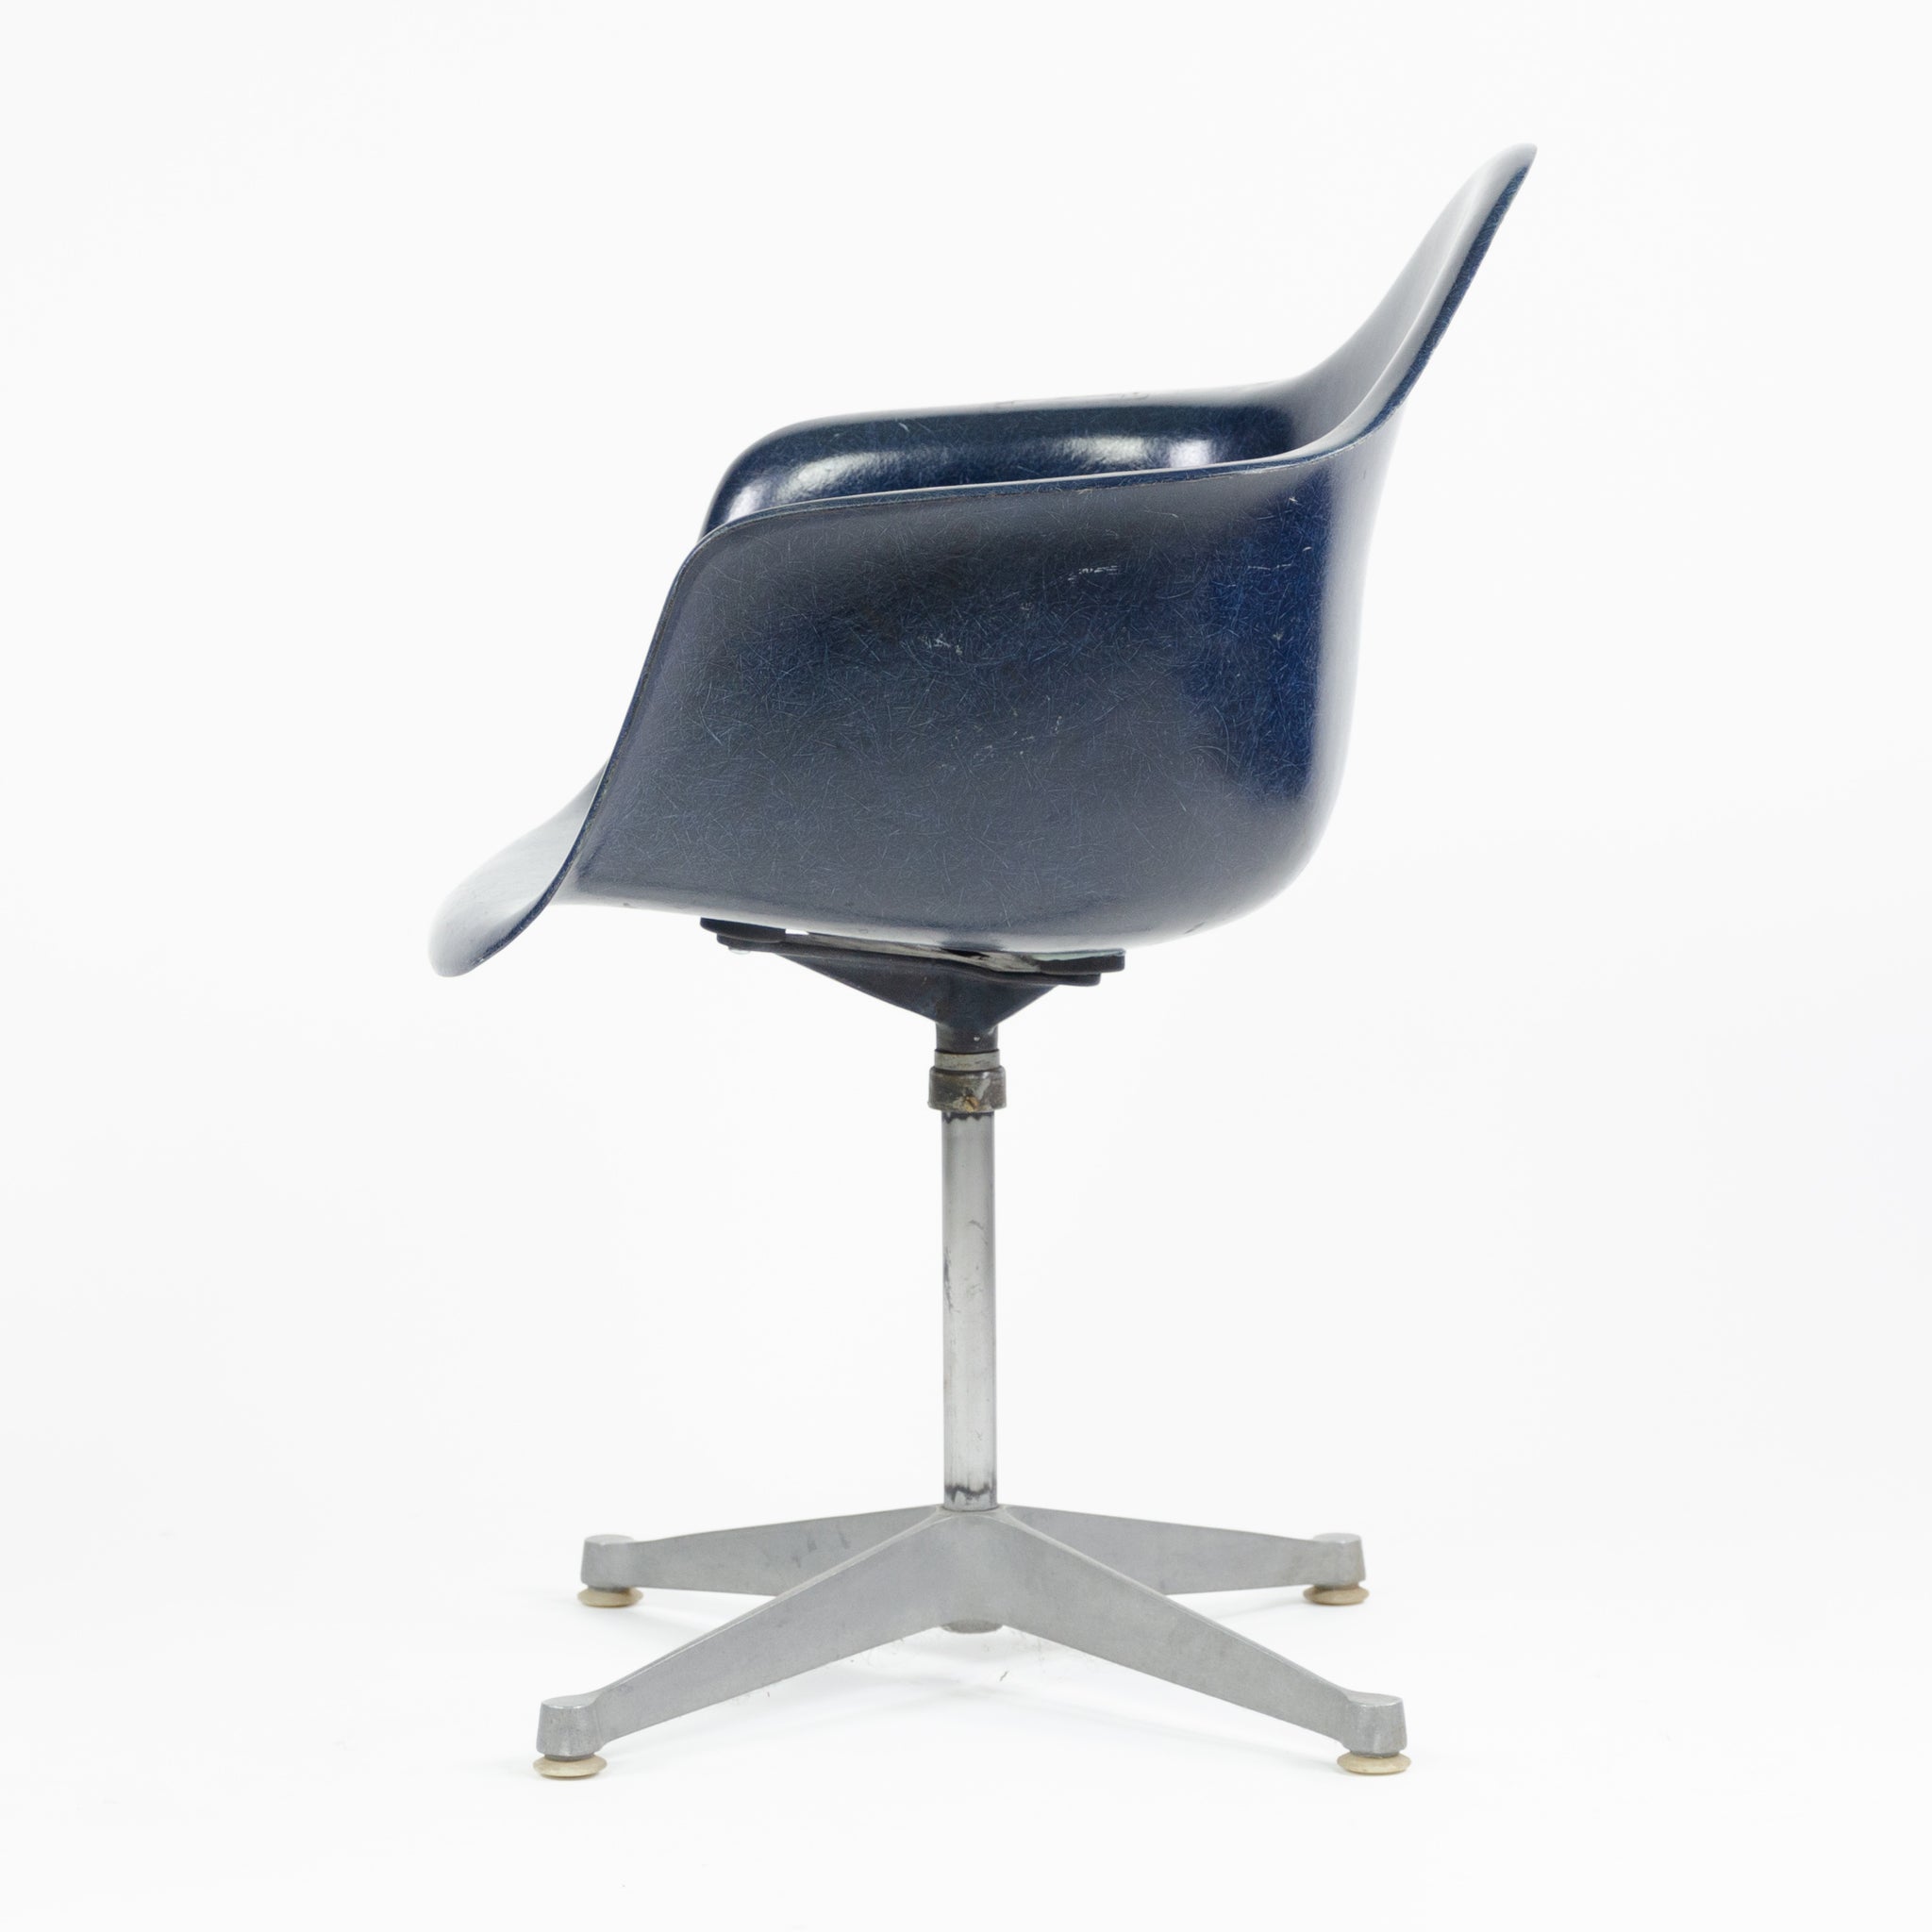 SOLD Herman Miller Eames 1960's Navy Blue Fiberglass Chair Arm Shell Holes Repaired